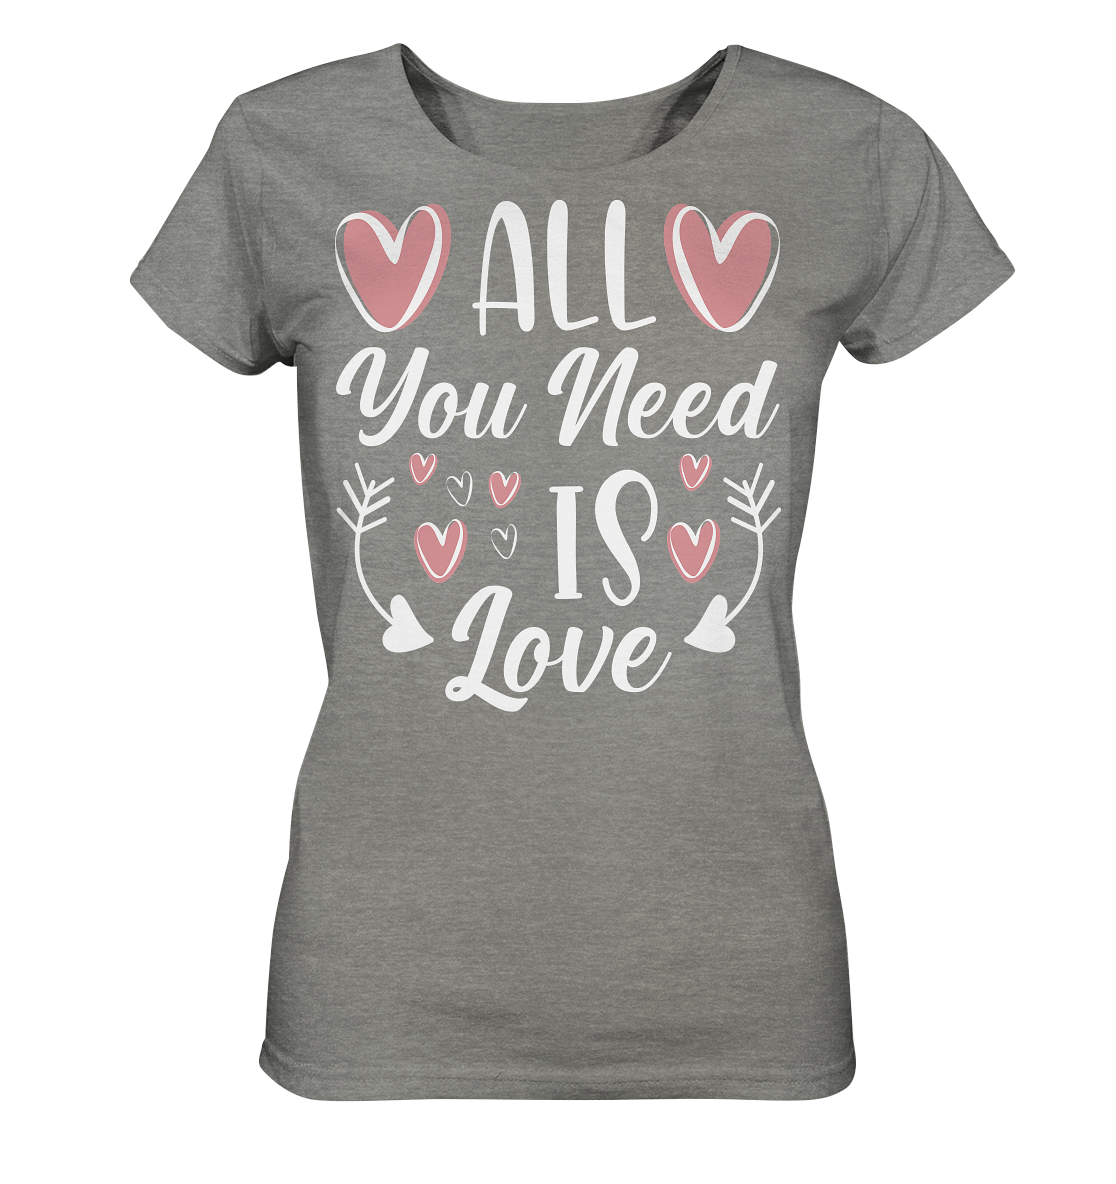 All You need is Love - Ladies Organic Shirt (meliert)